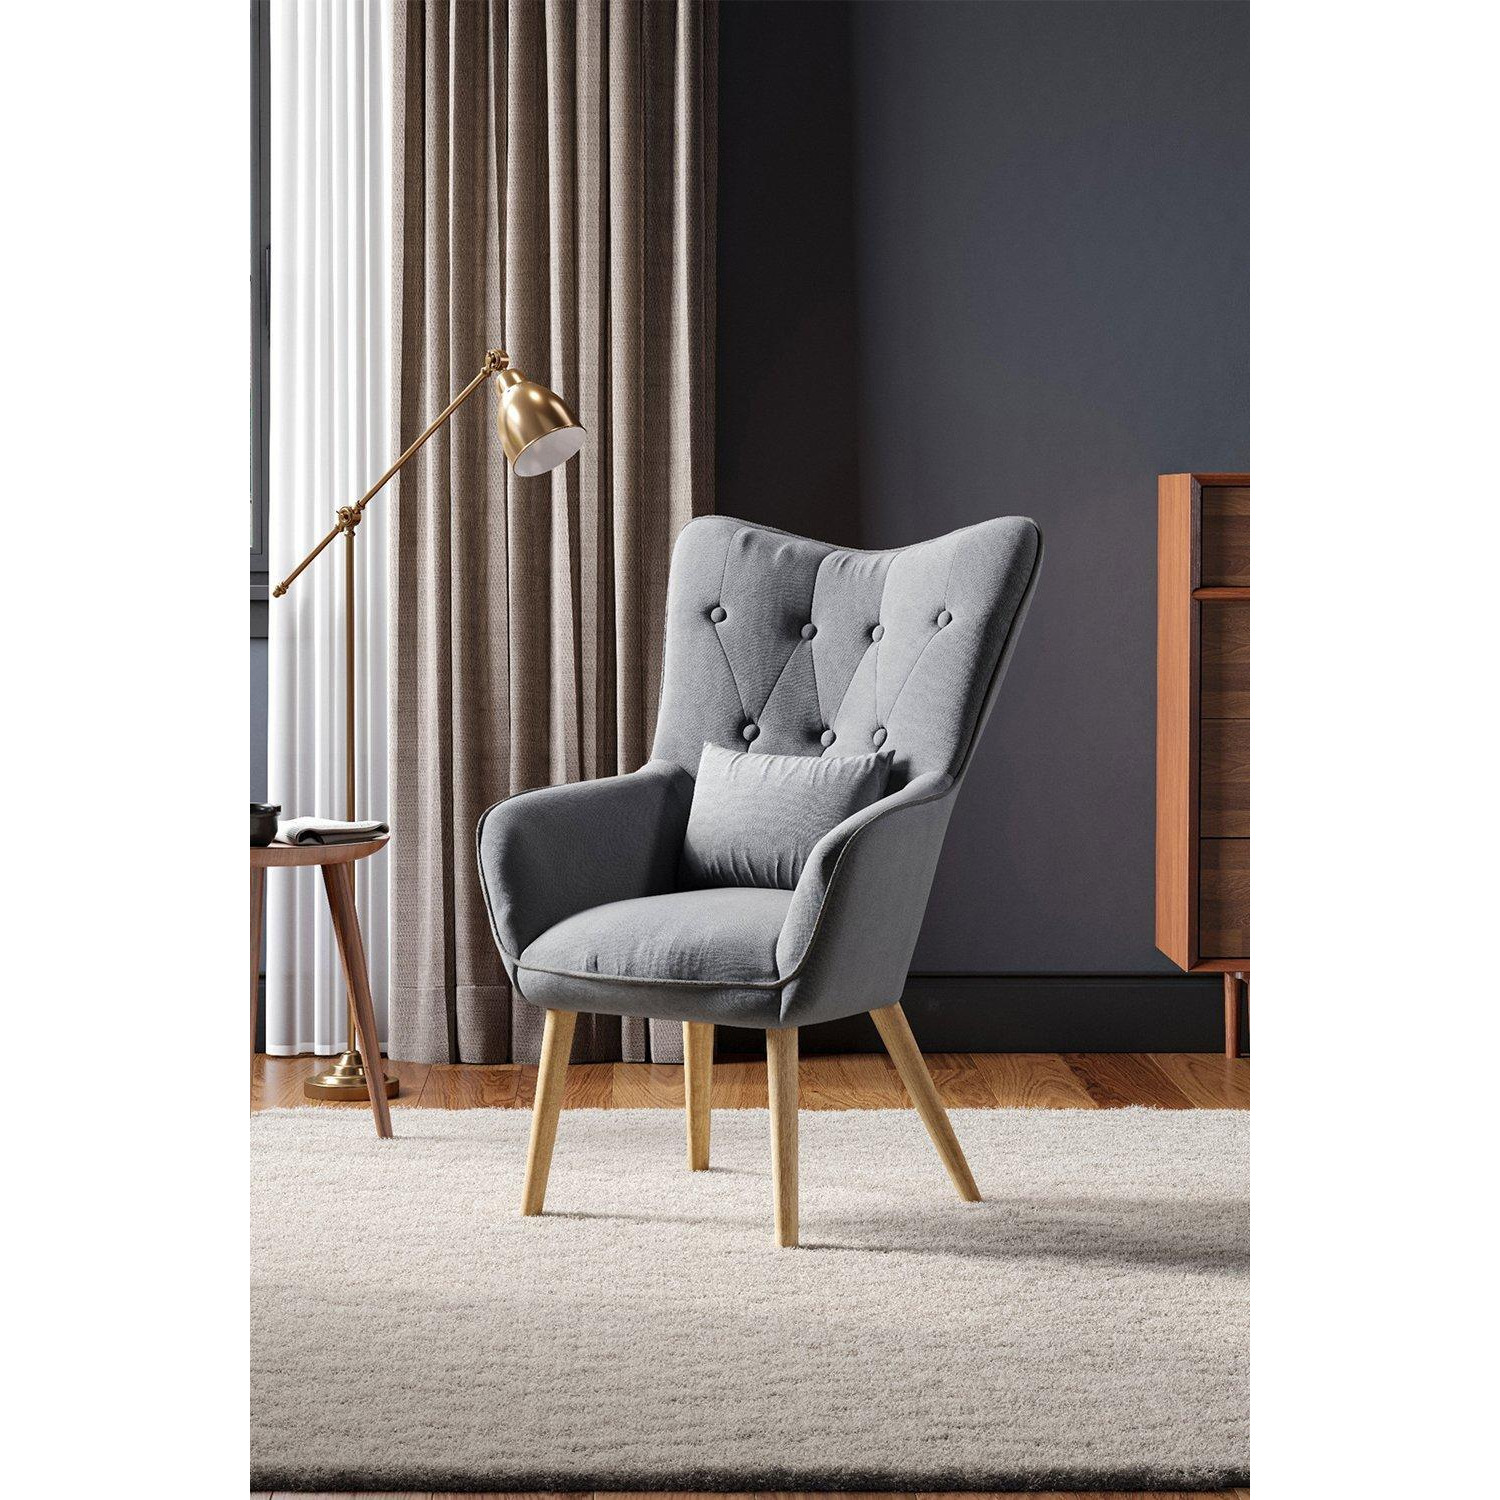 Dark Grey Linen Curved High Wing Back Armchair with Cushion - image 1